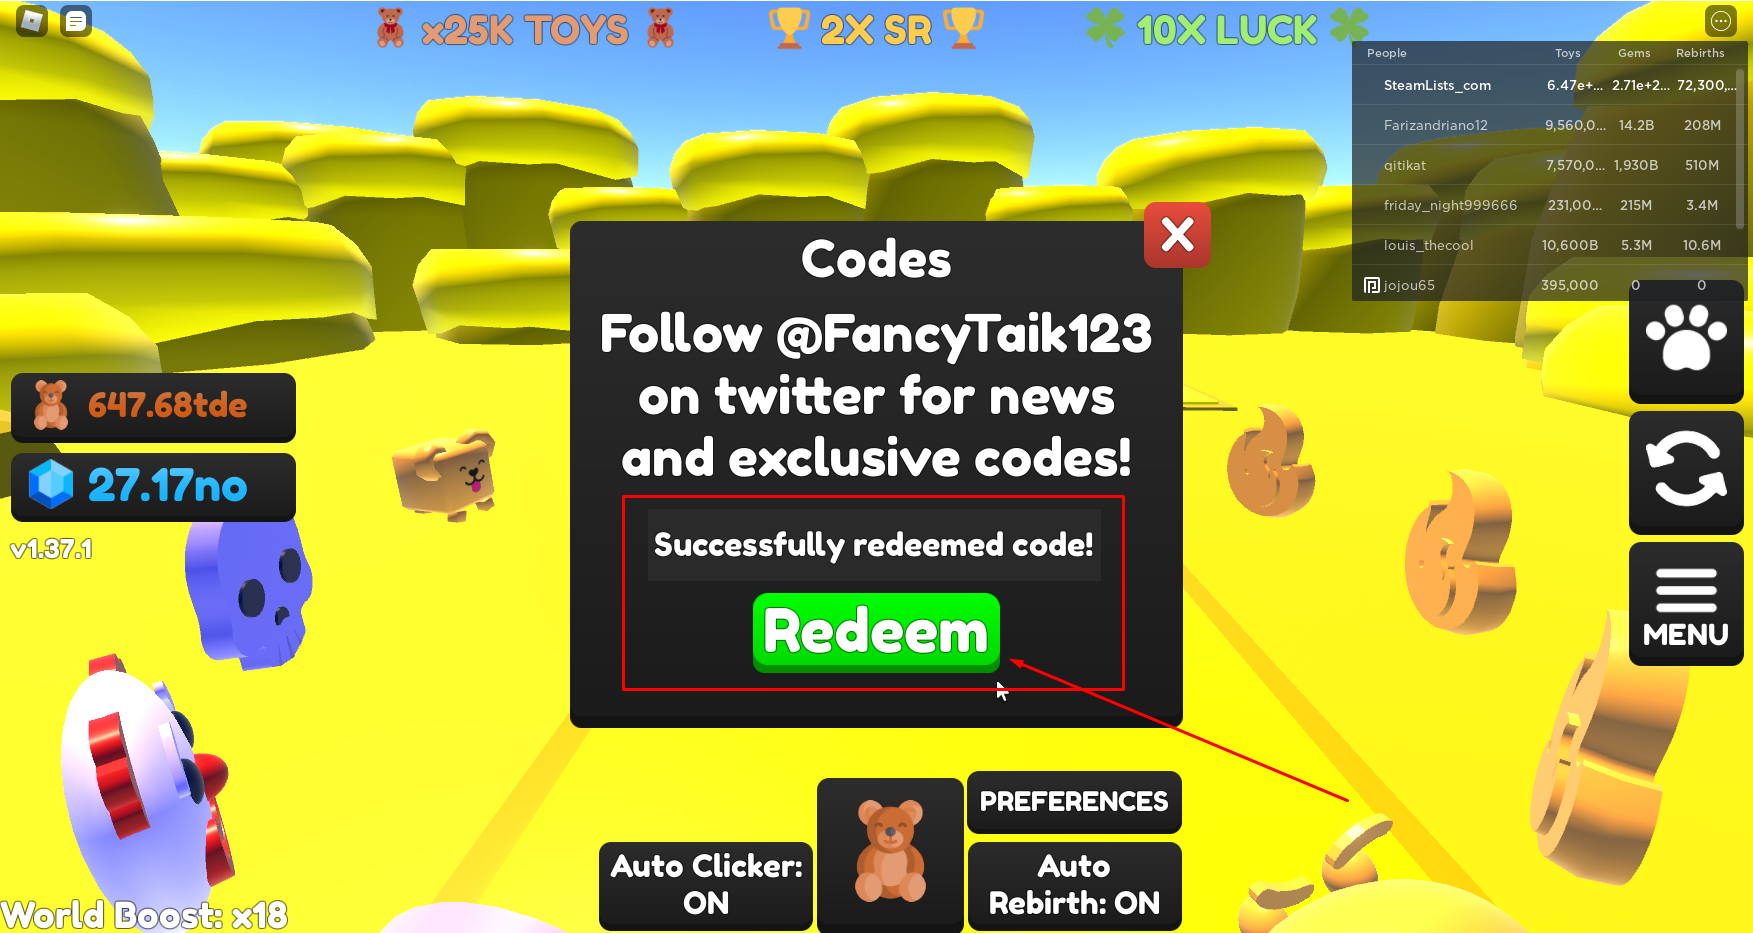 Roblox Toy Clicking Simulator Codes Free Tokens Gems Pets And Toys August 2023 Steam Lists